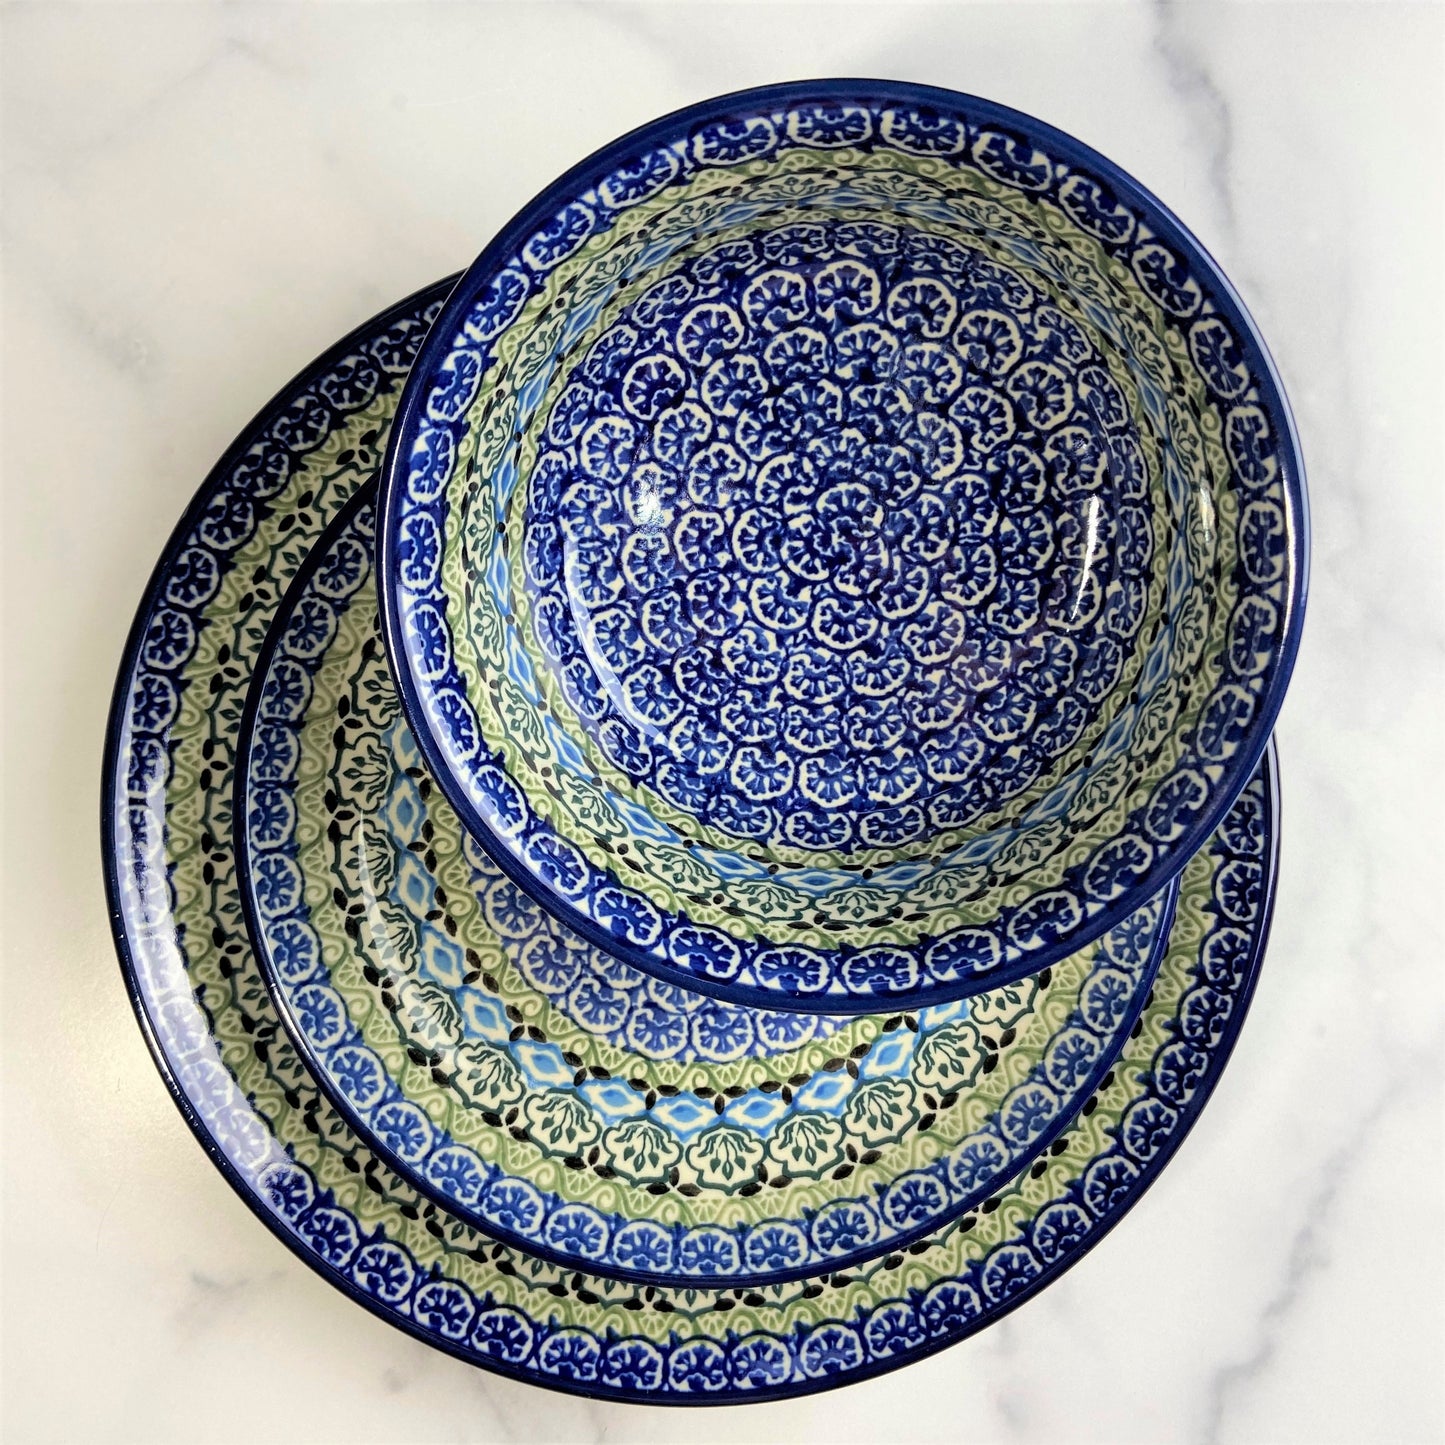 Tranquility Dinner Plate 10"